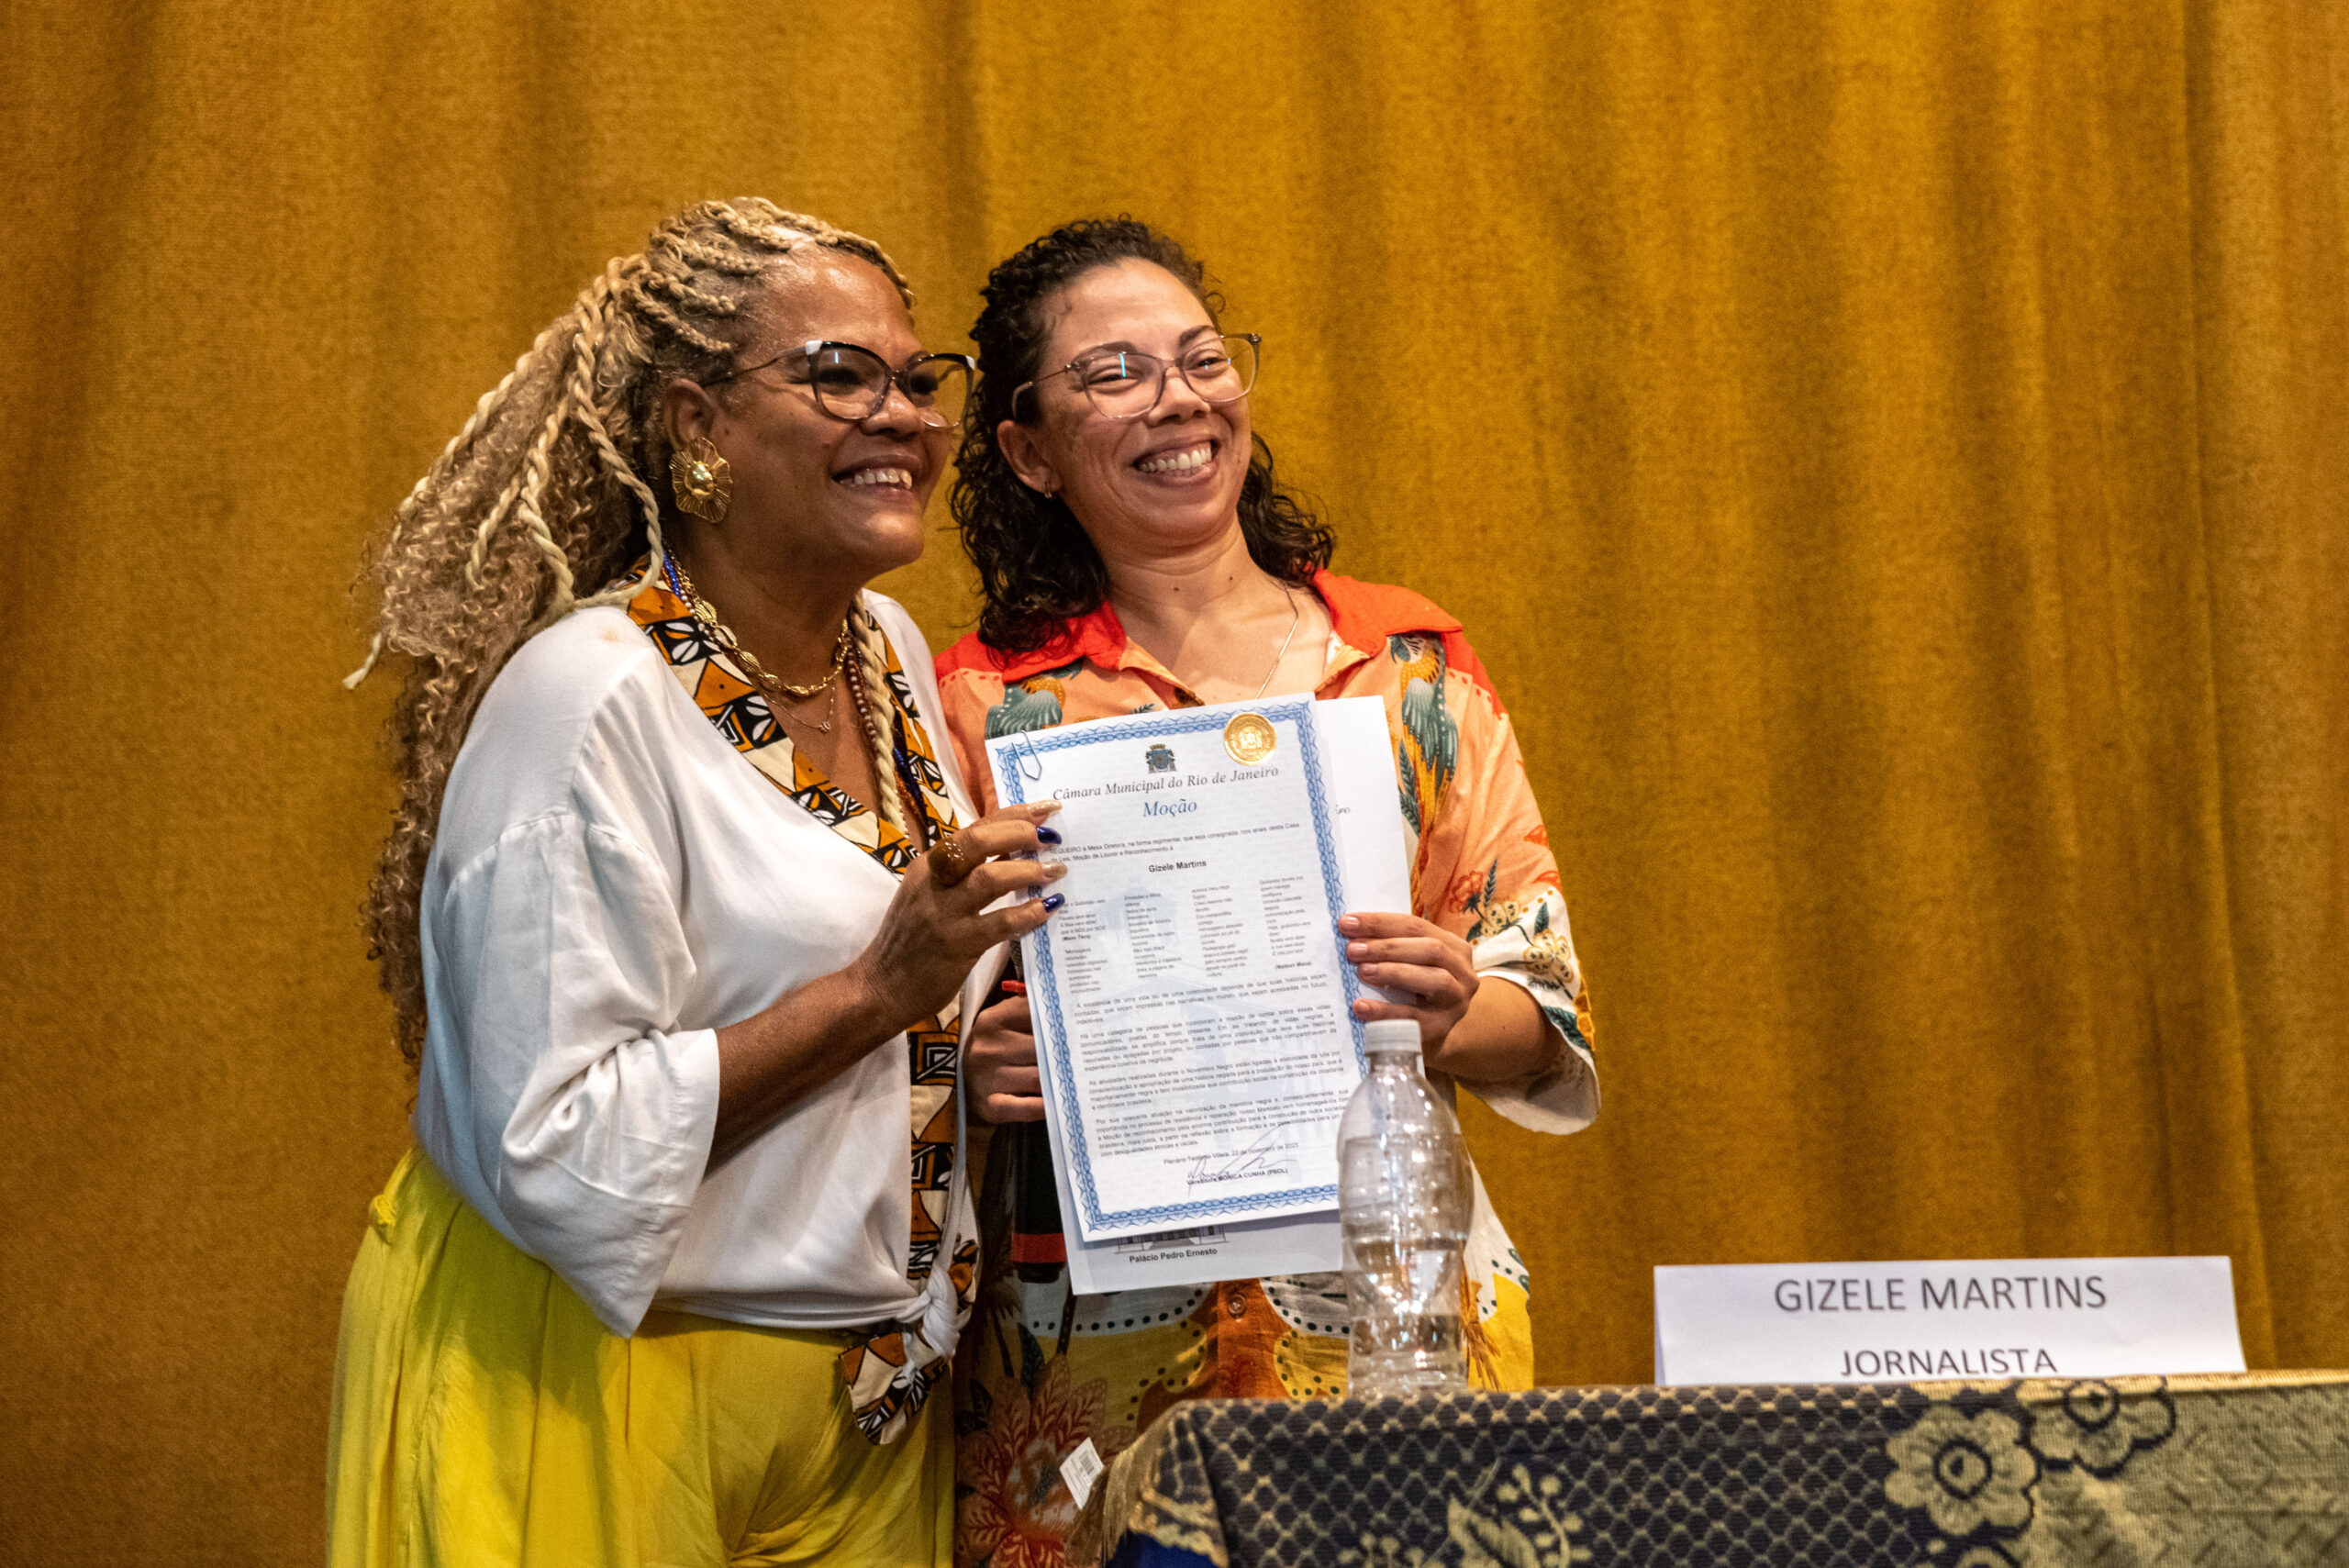 Mônica Cunha delivers Motion of Praise and Recognition to Gizele Martins, journalist from Maré and human rights activist. Photo: Bárbara Dias